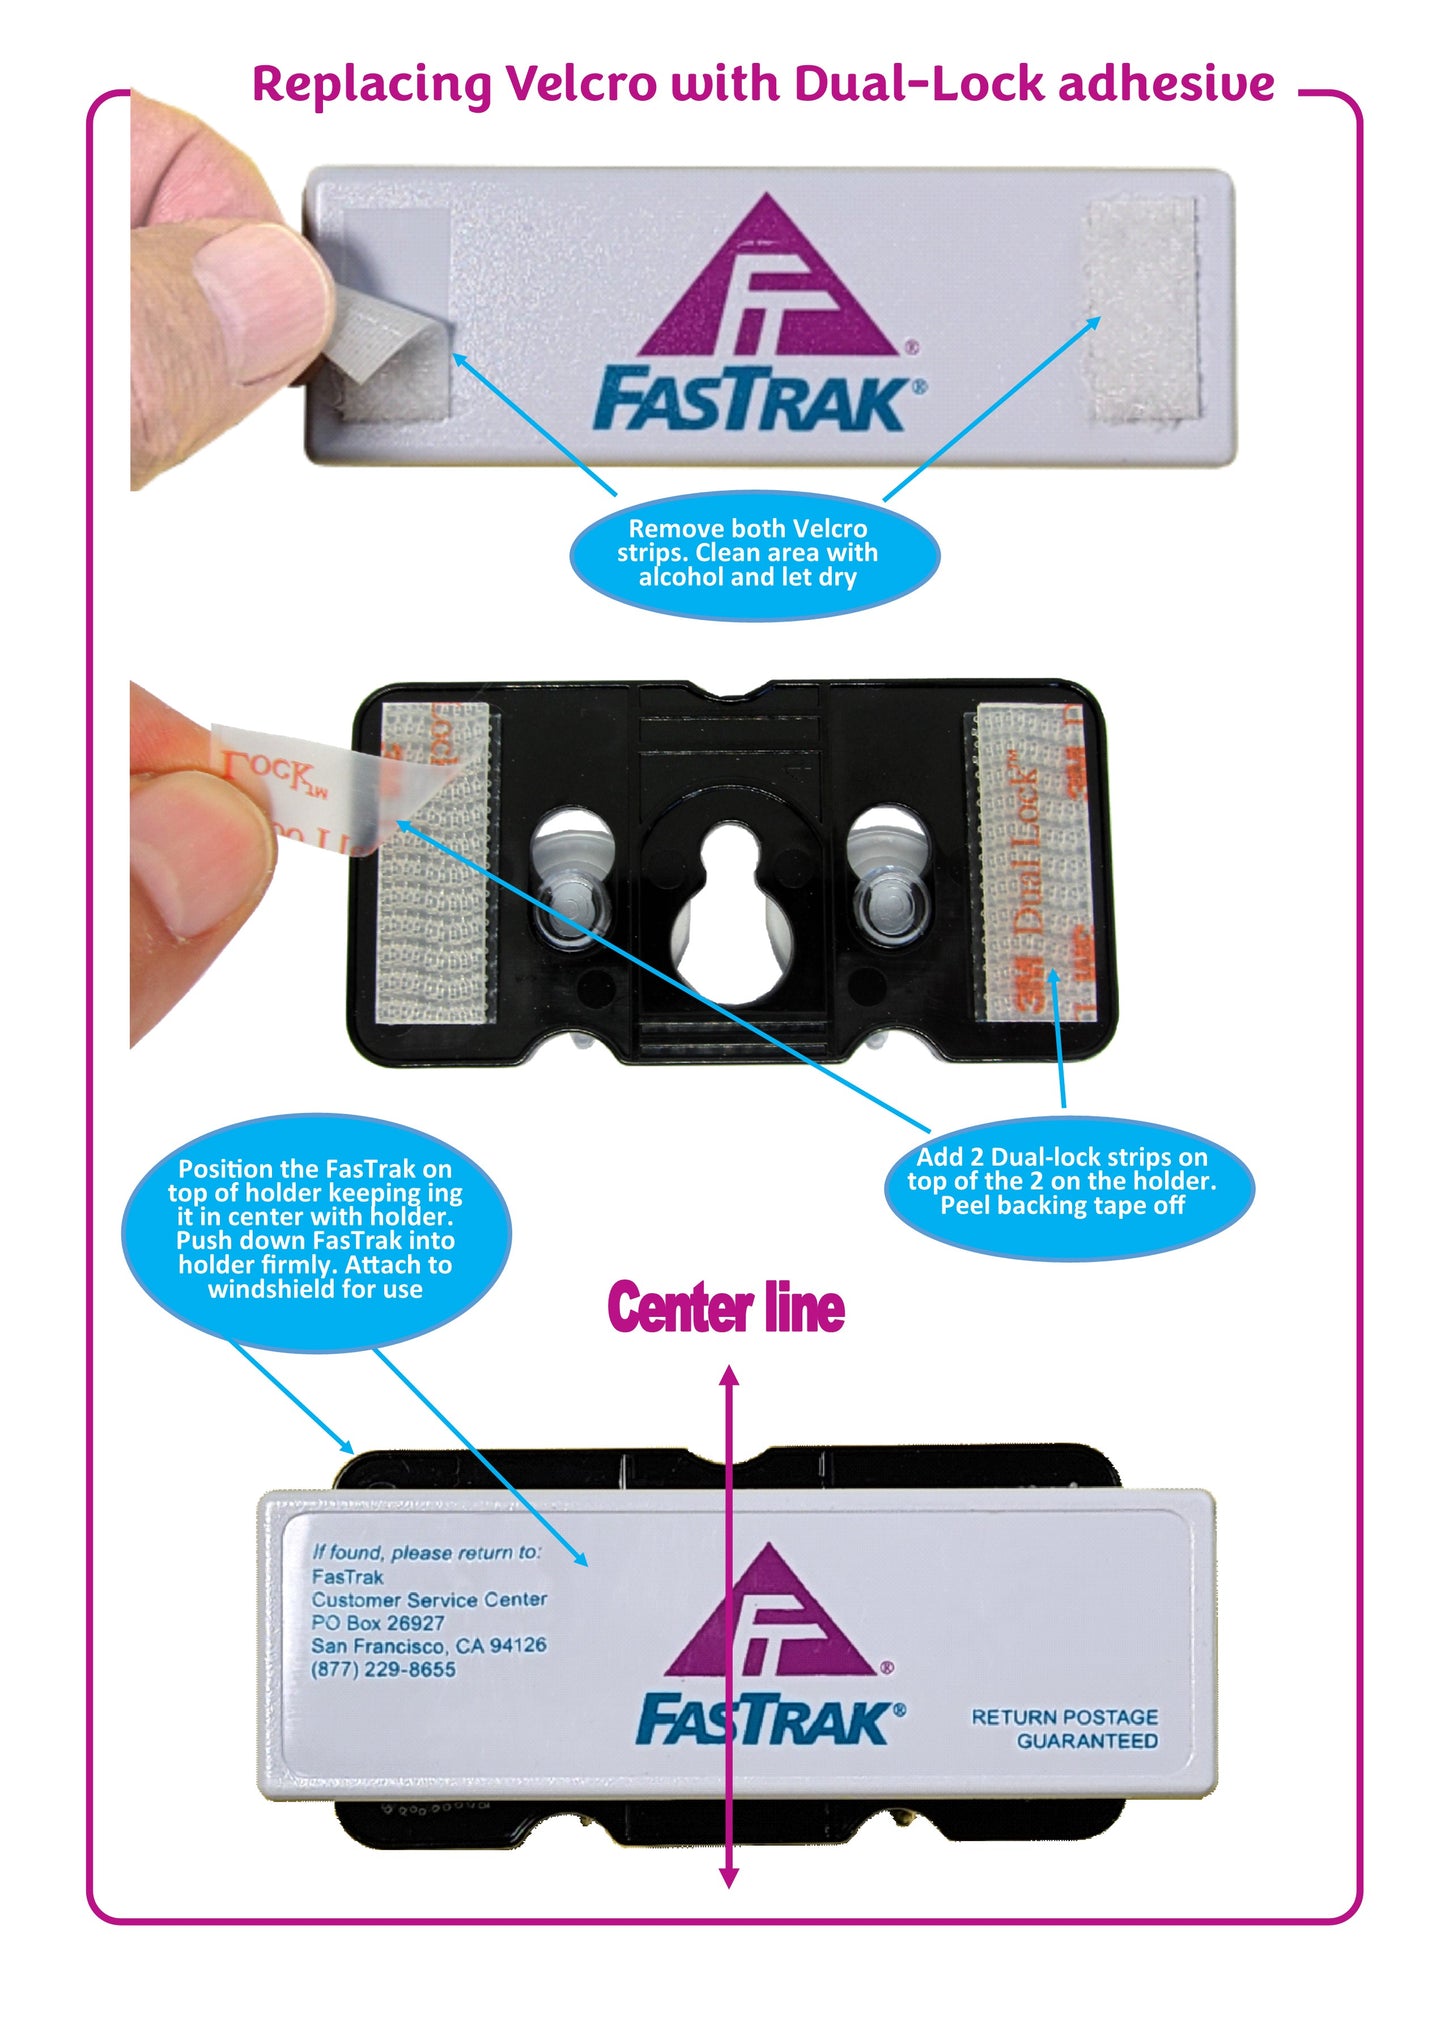 EZ Pass-Mate™ Black - Universal FasTrak Toll Pass Holder by JL Safety. Sturdy Toll Tag Holder for ALL FasTrak models including FasTrak Flex CAV and FasTrak Standard / Switchable & HOV. Comes with 3 Suction Cup Sizes and 2 Extra Strips. Made in USA